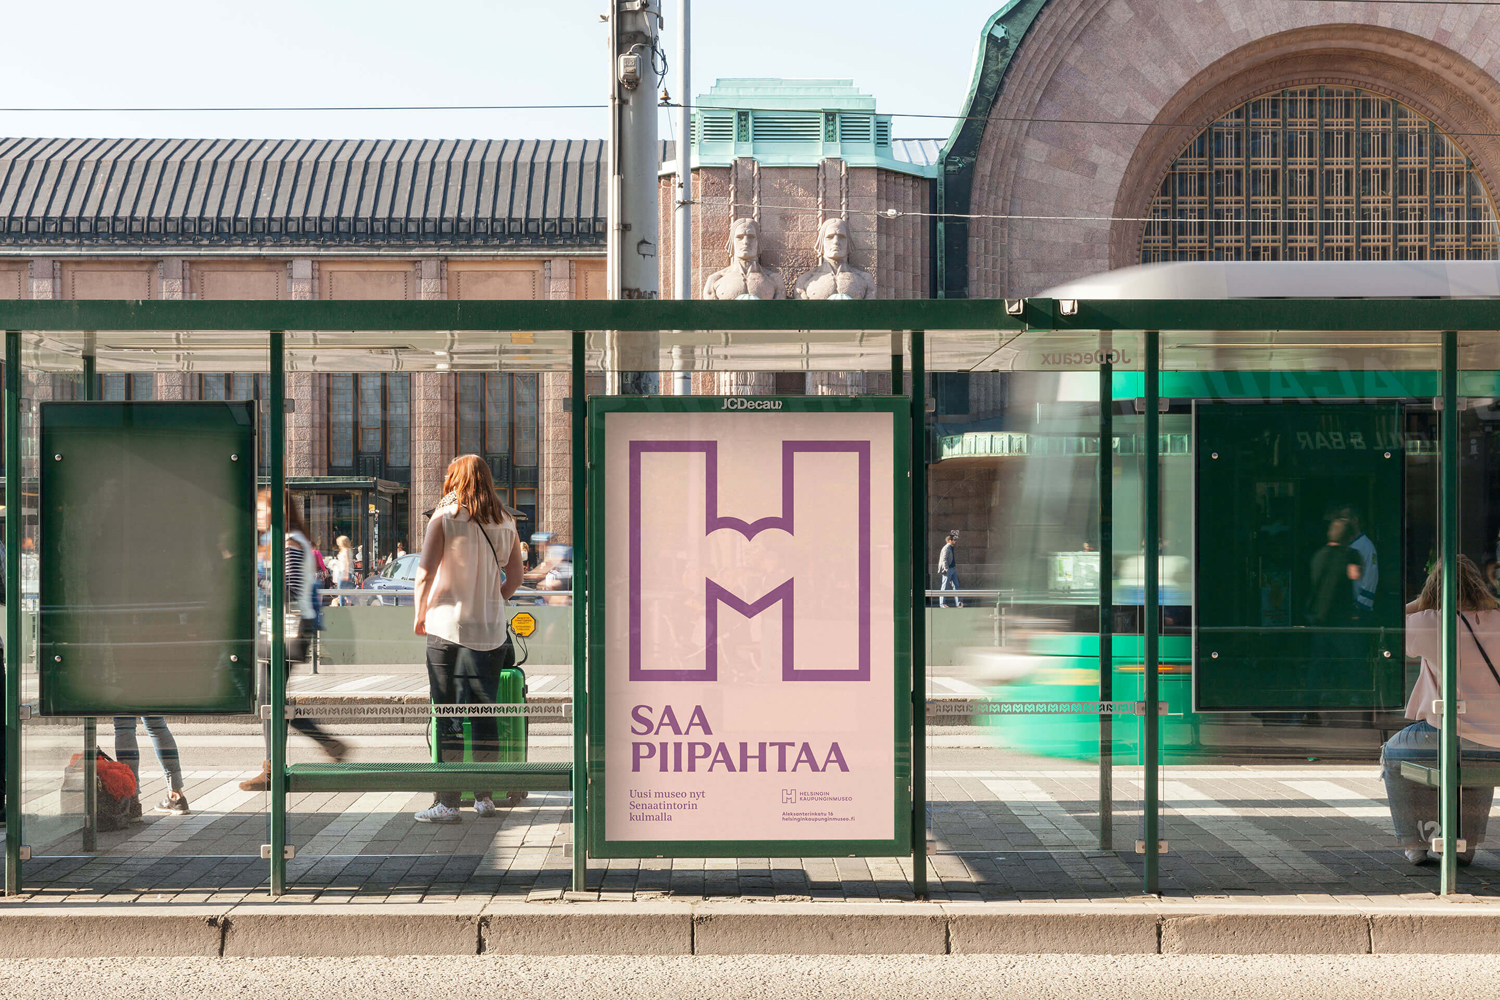 Brand identity and print campaign by Finnish graphic design studio Werklig for Helsinki City Museum